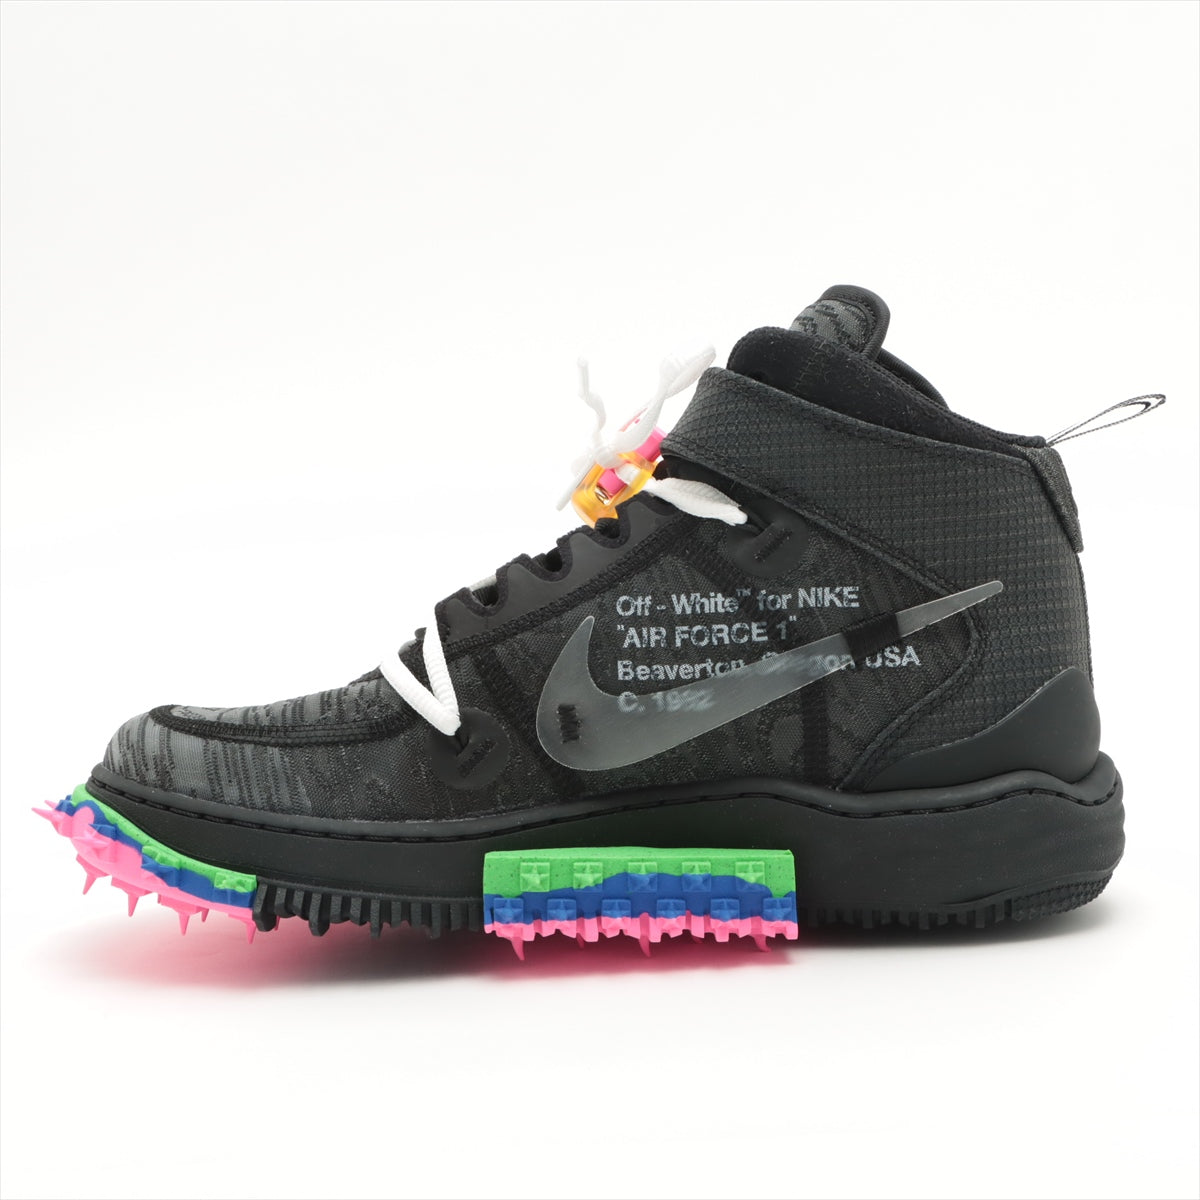 NIKE × OFF-WHITE AIR FORCE 1 MID Fabric High-top Sneakers 26㎝ Men's Black x Gray DD6290-001 Box Included